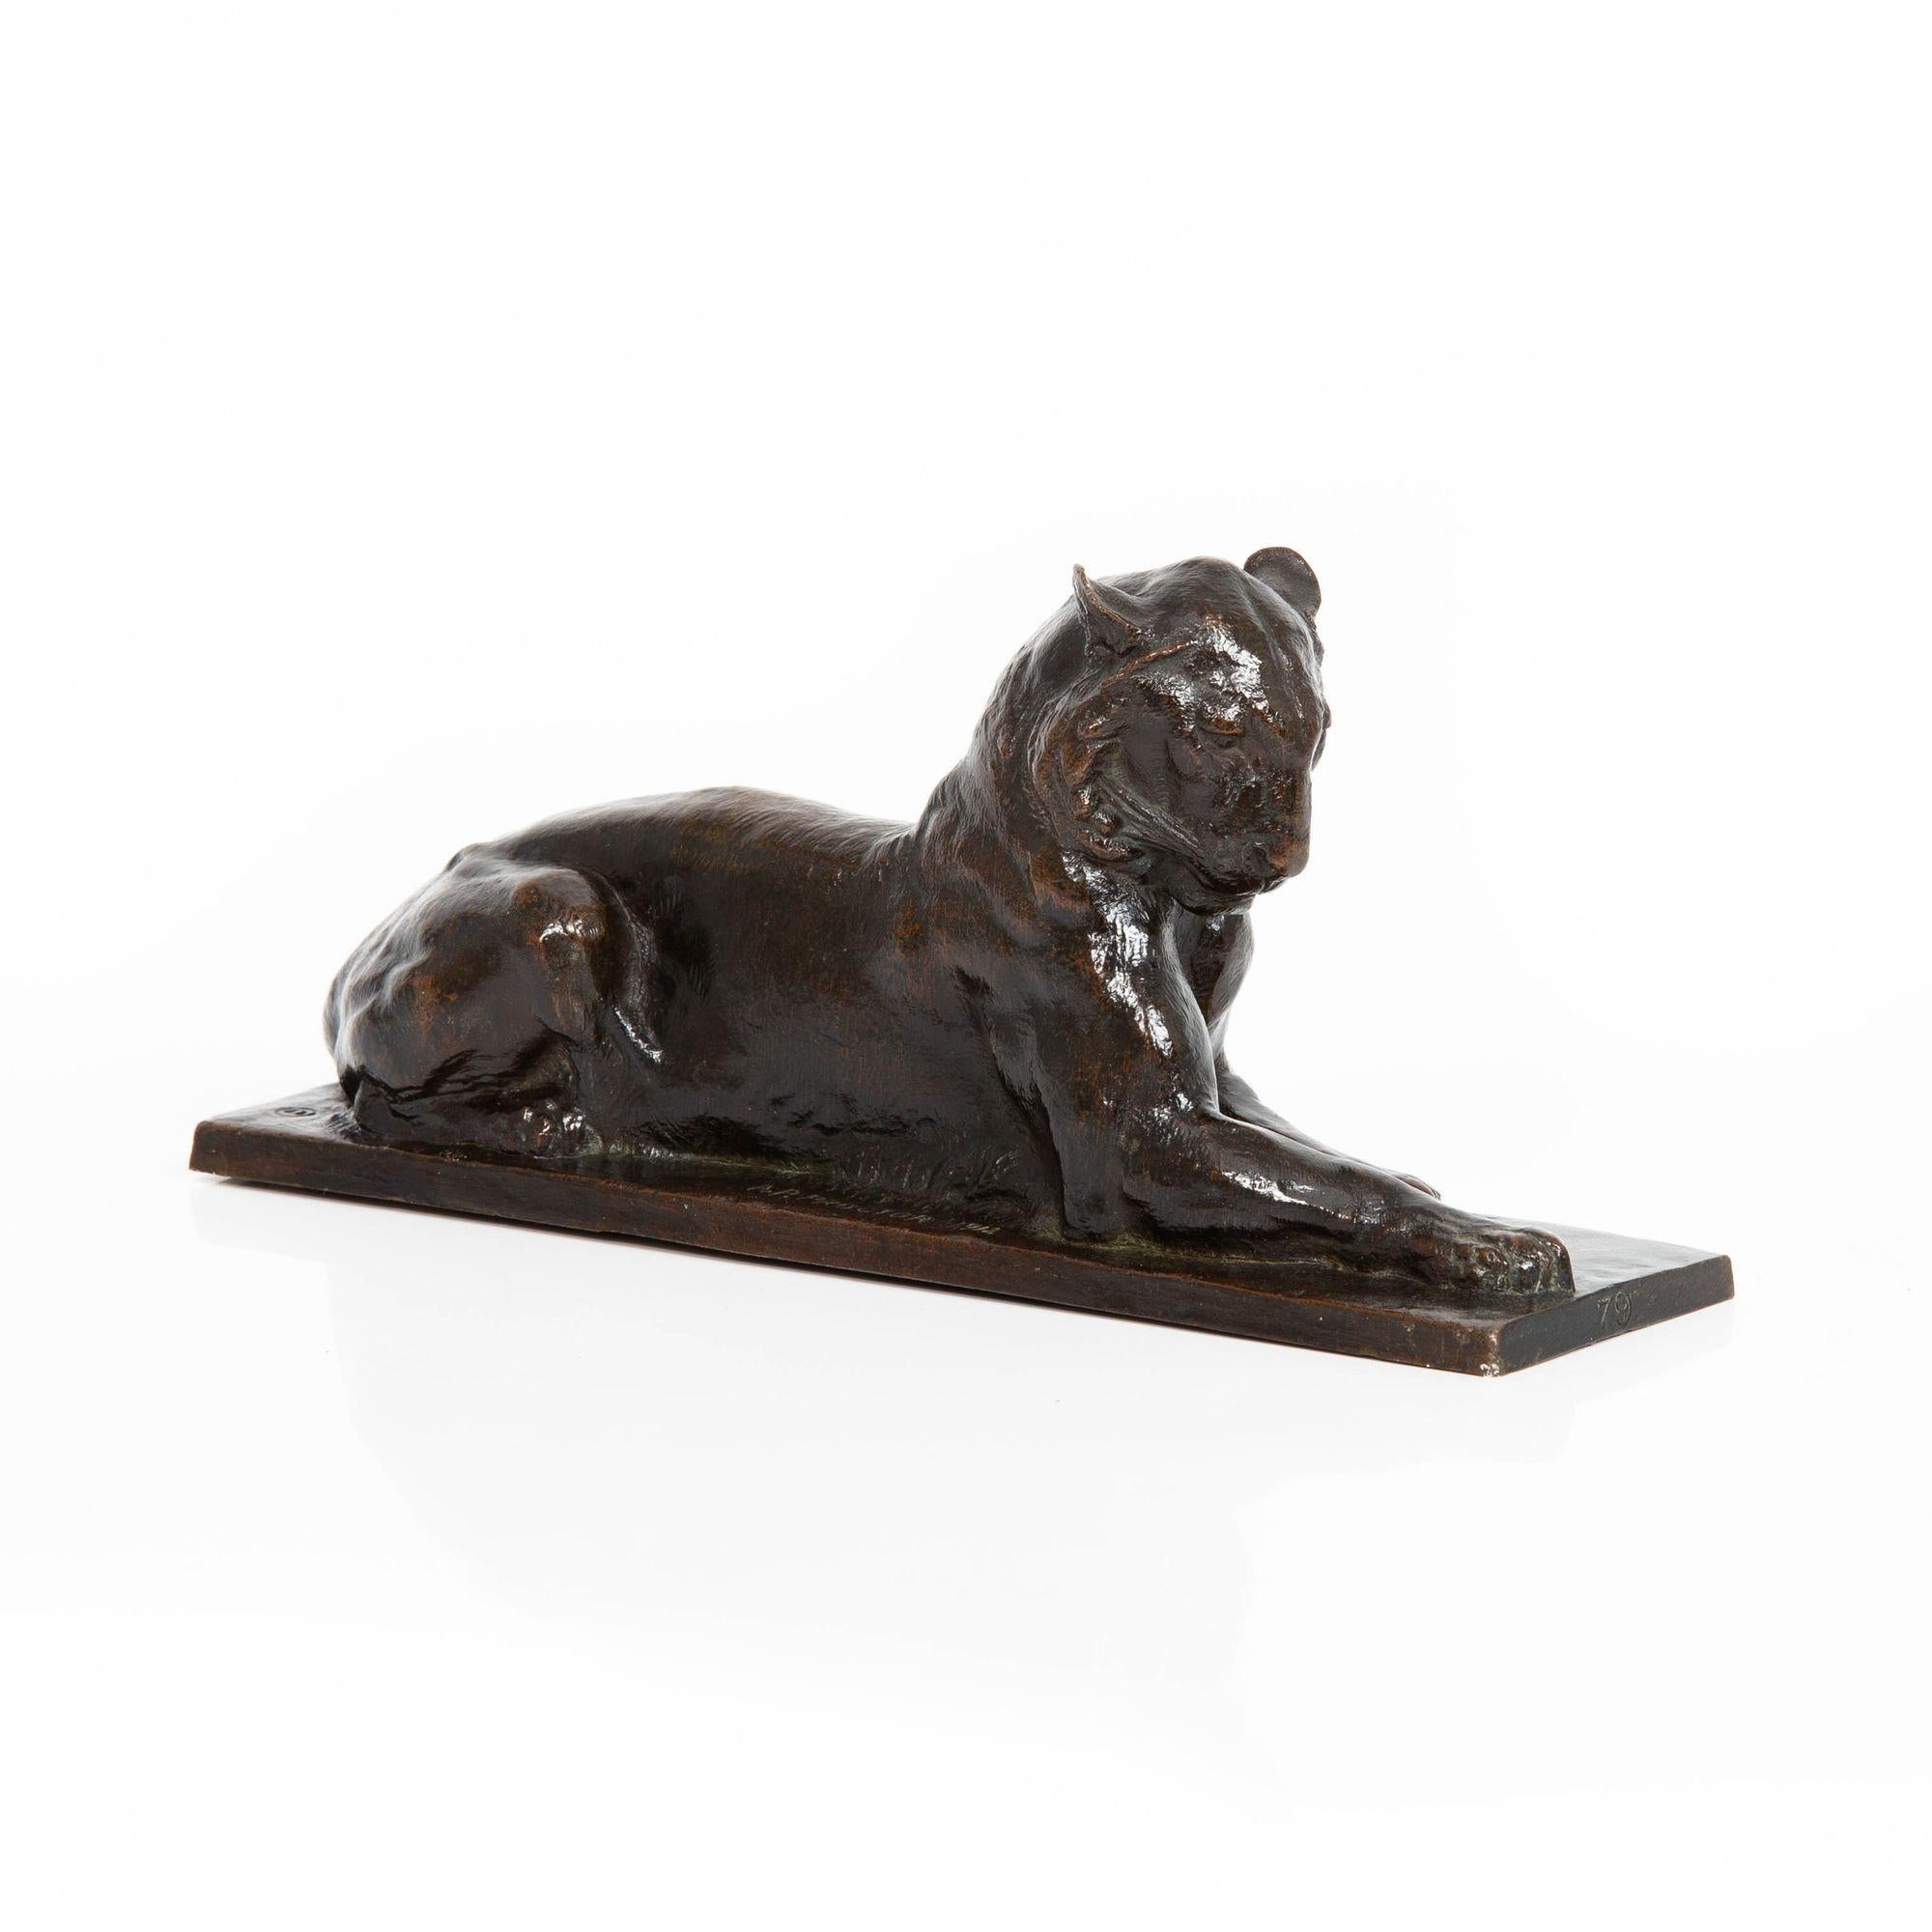 20th Century Rare American Sculpture of “Princeton Tiger” by Alexander Phimister Proctor For Sale